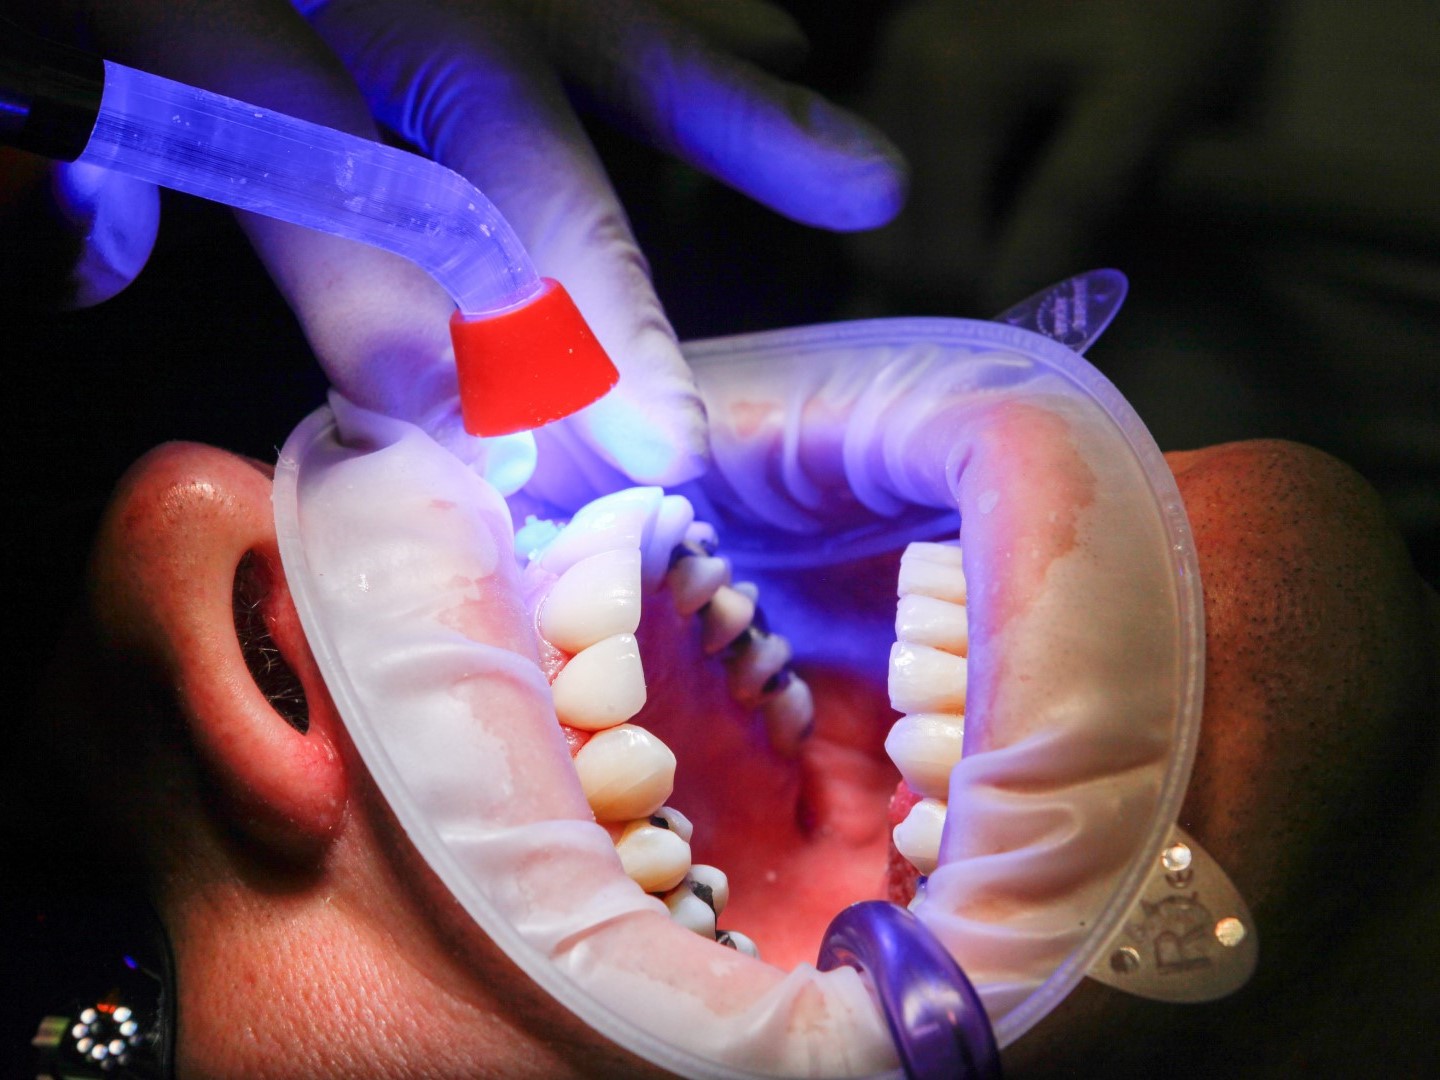 gum-disease-checking-closed-up-on-mouth-with-blue-light